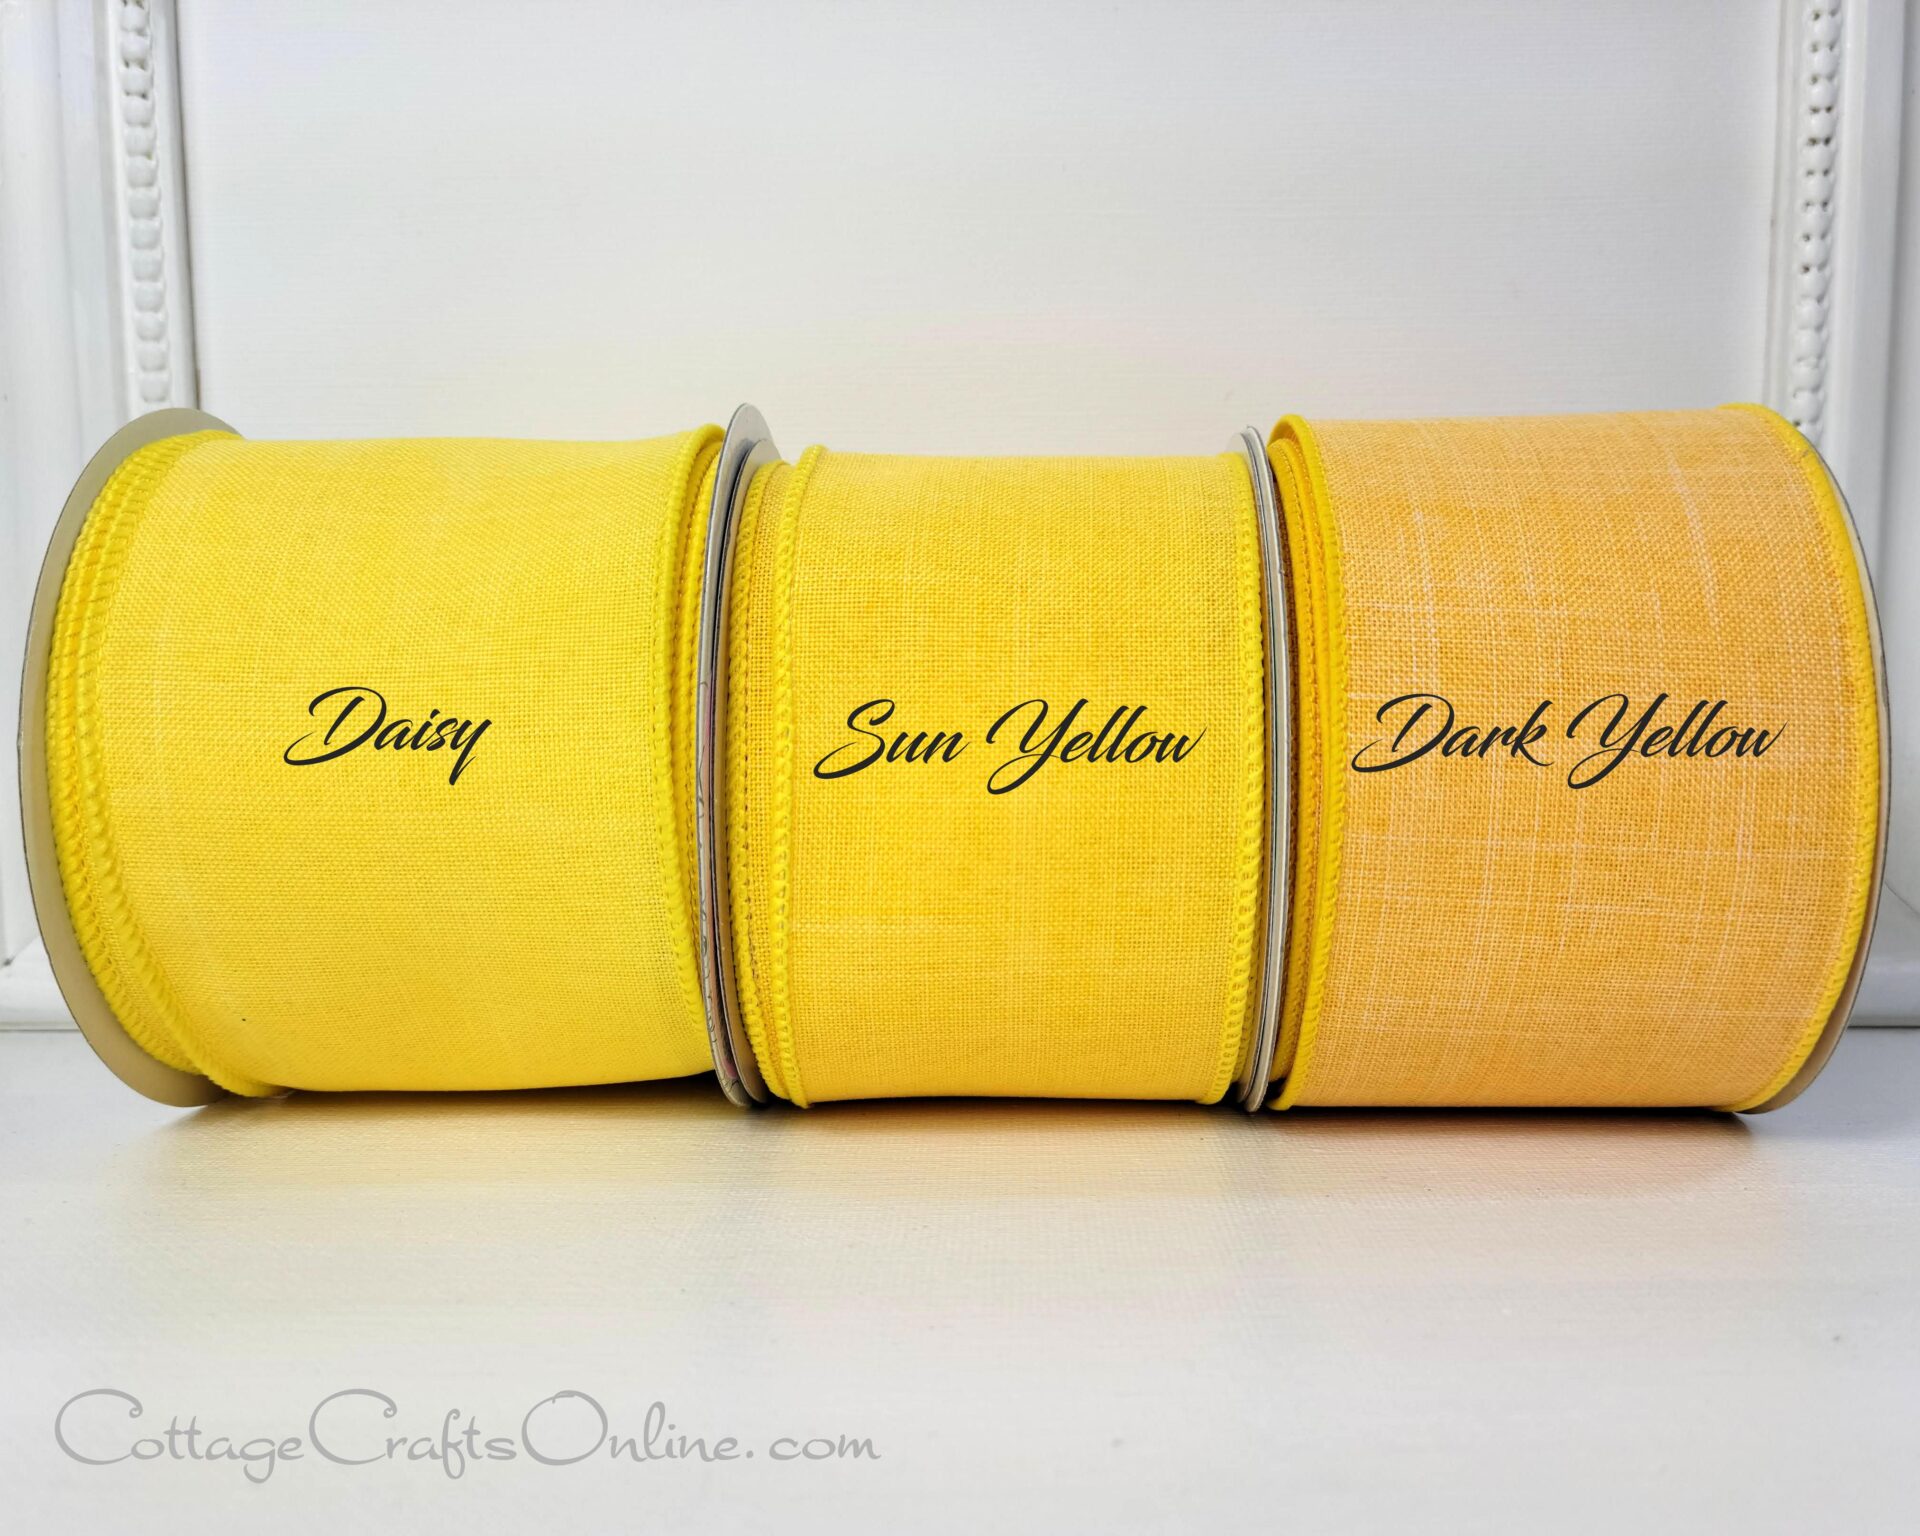 Three yellow towels with names on them.